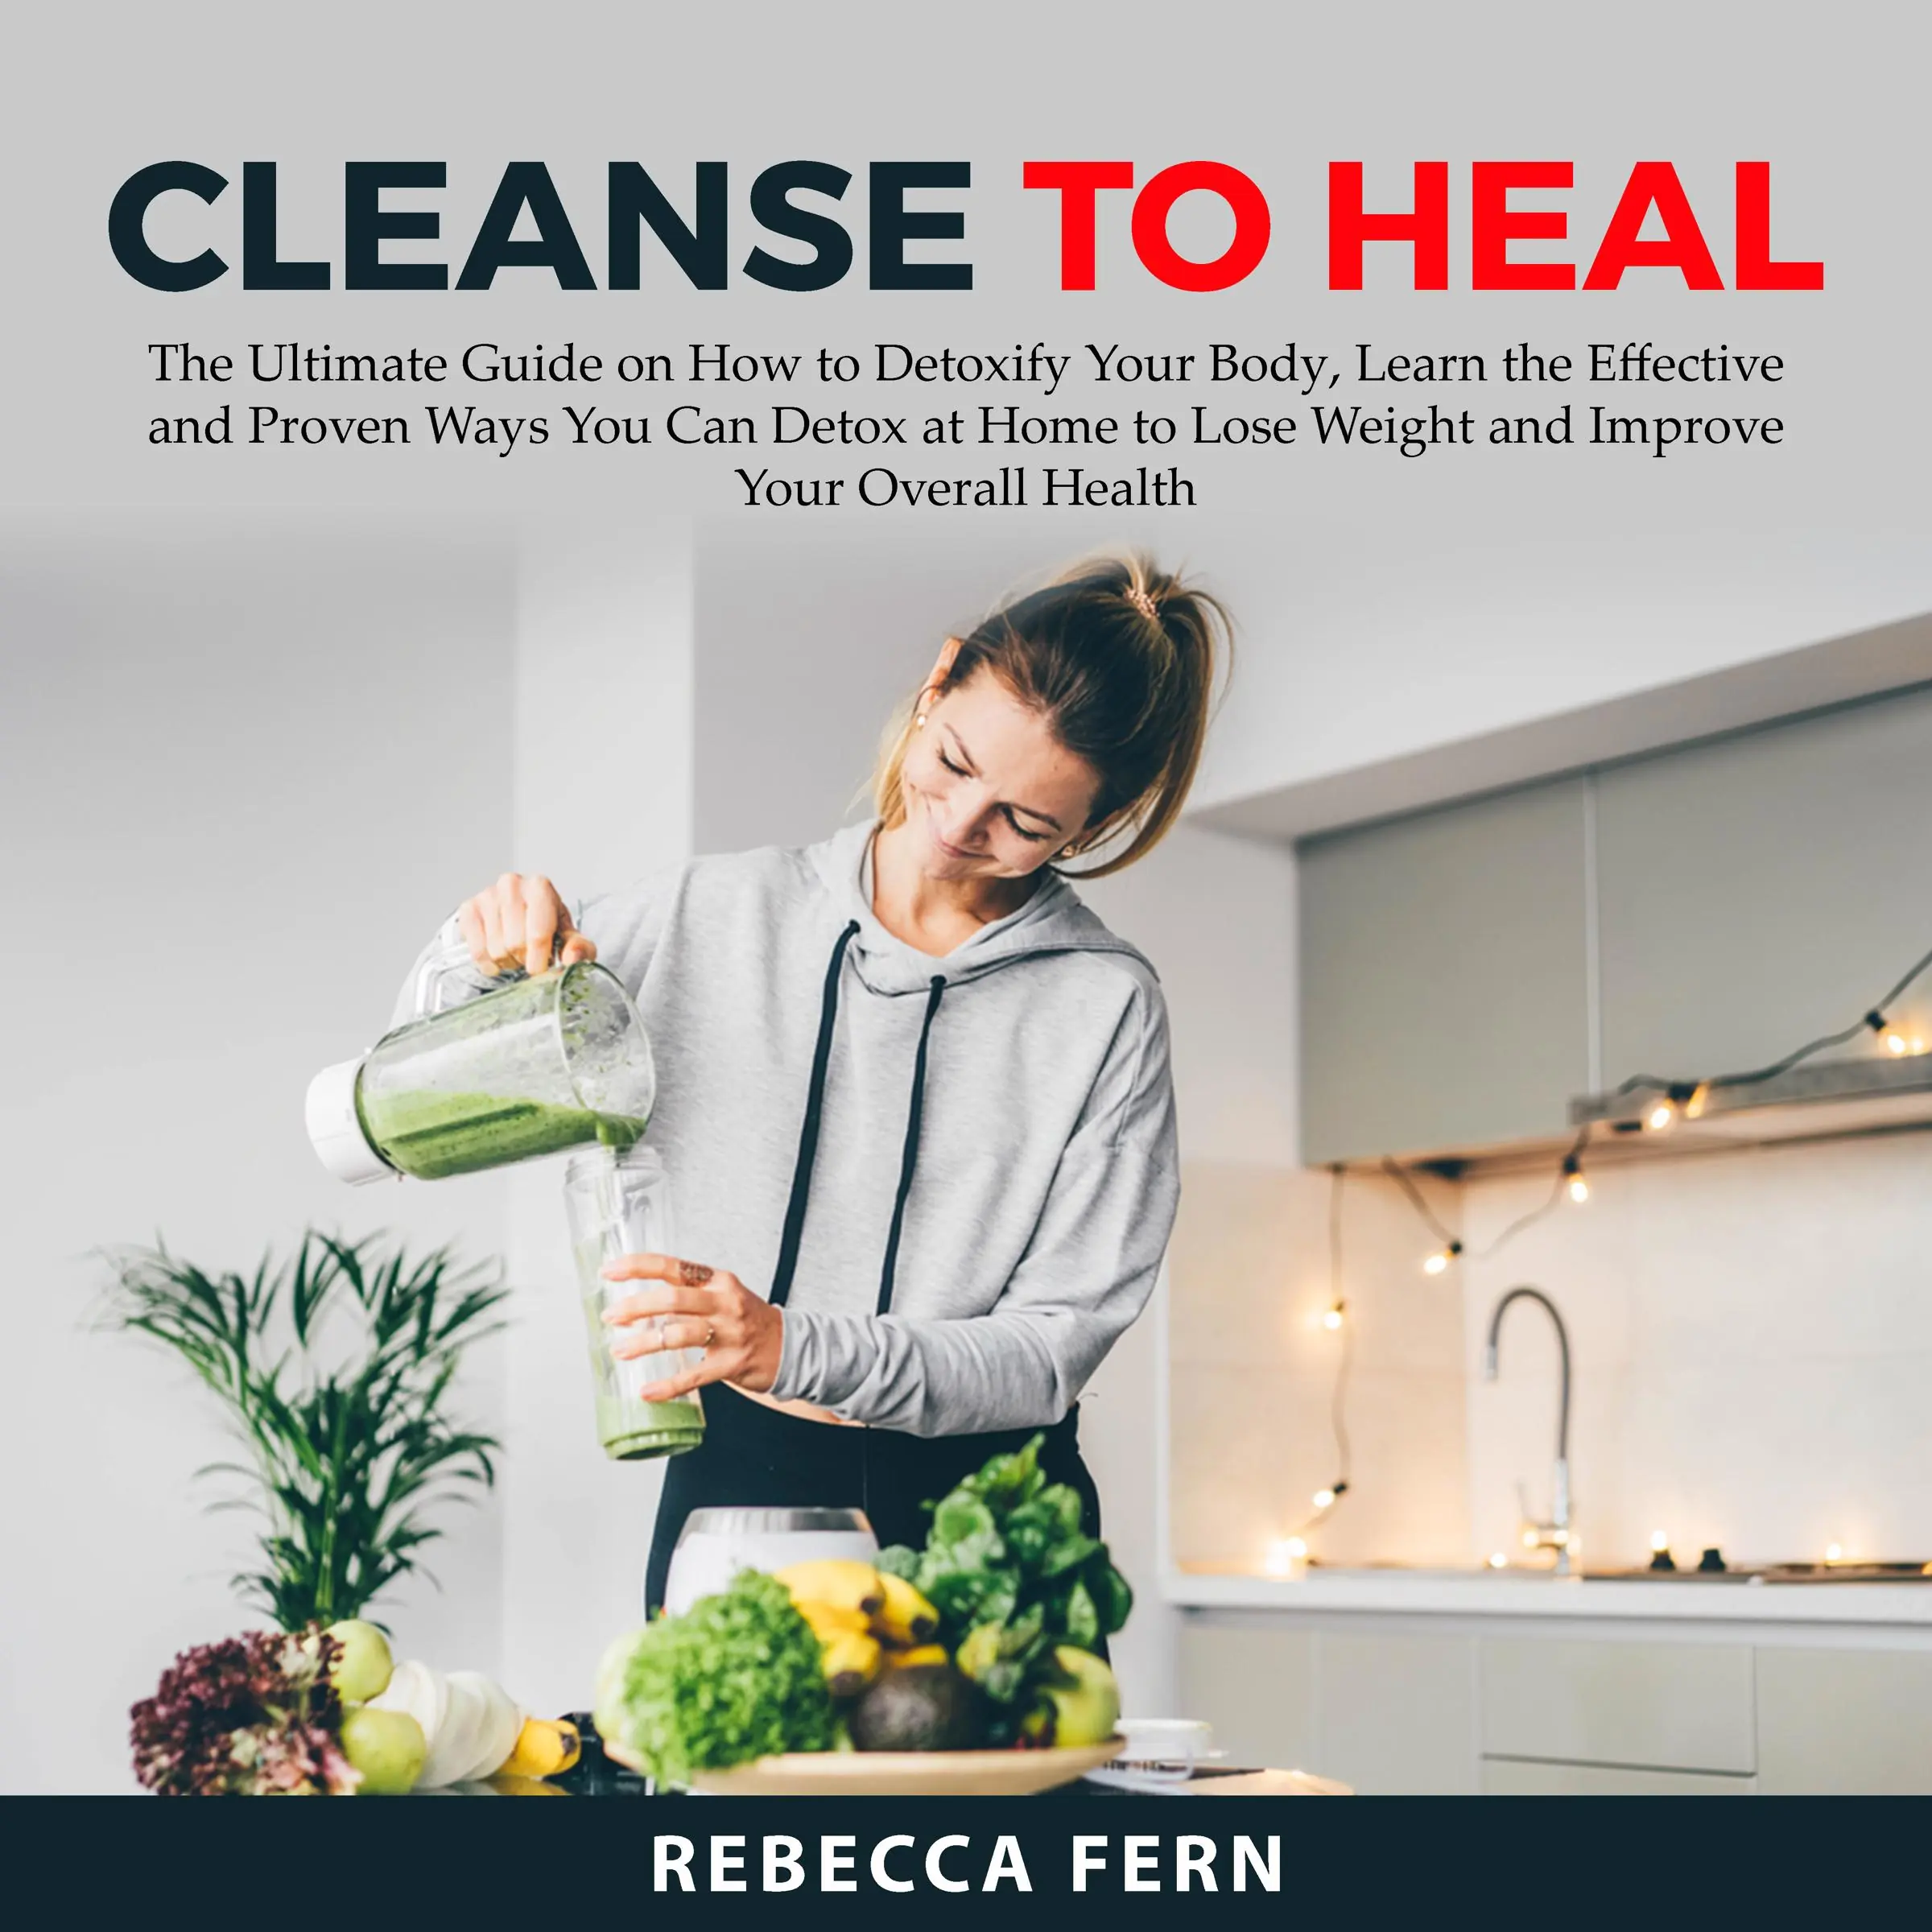 Cleanse To Heal: The Ultimate Guide on How to Detoxify Your Body, Learn the Effective and Proven Ways You Can Detox at Home to Lose Weight and Improve Your Overall Health Audiobook by Rebecca Fern